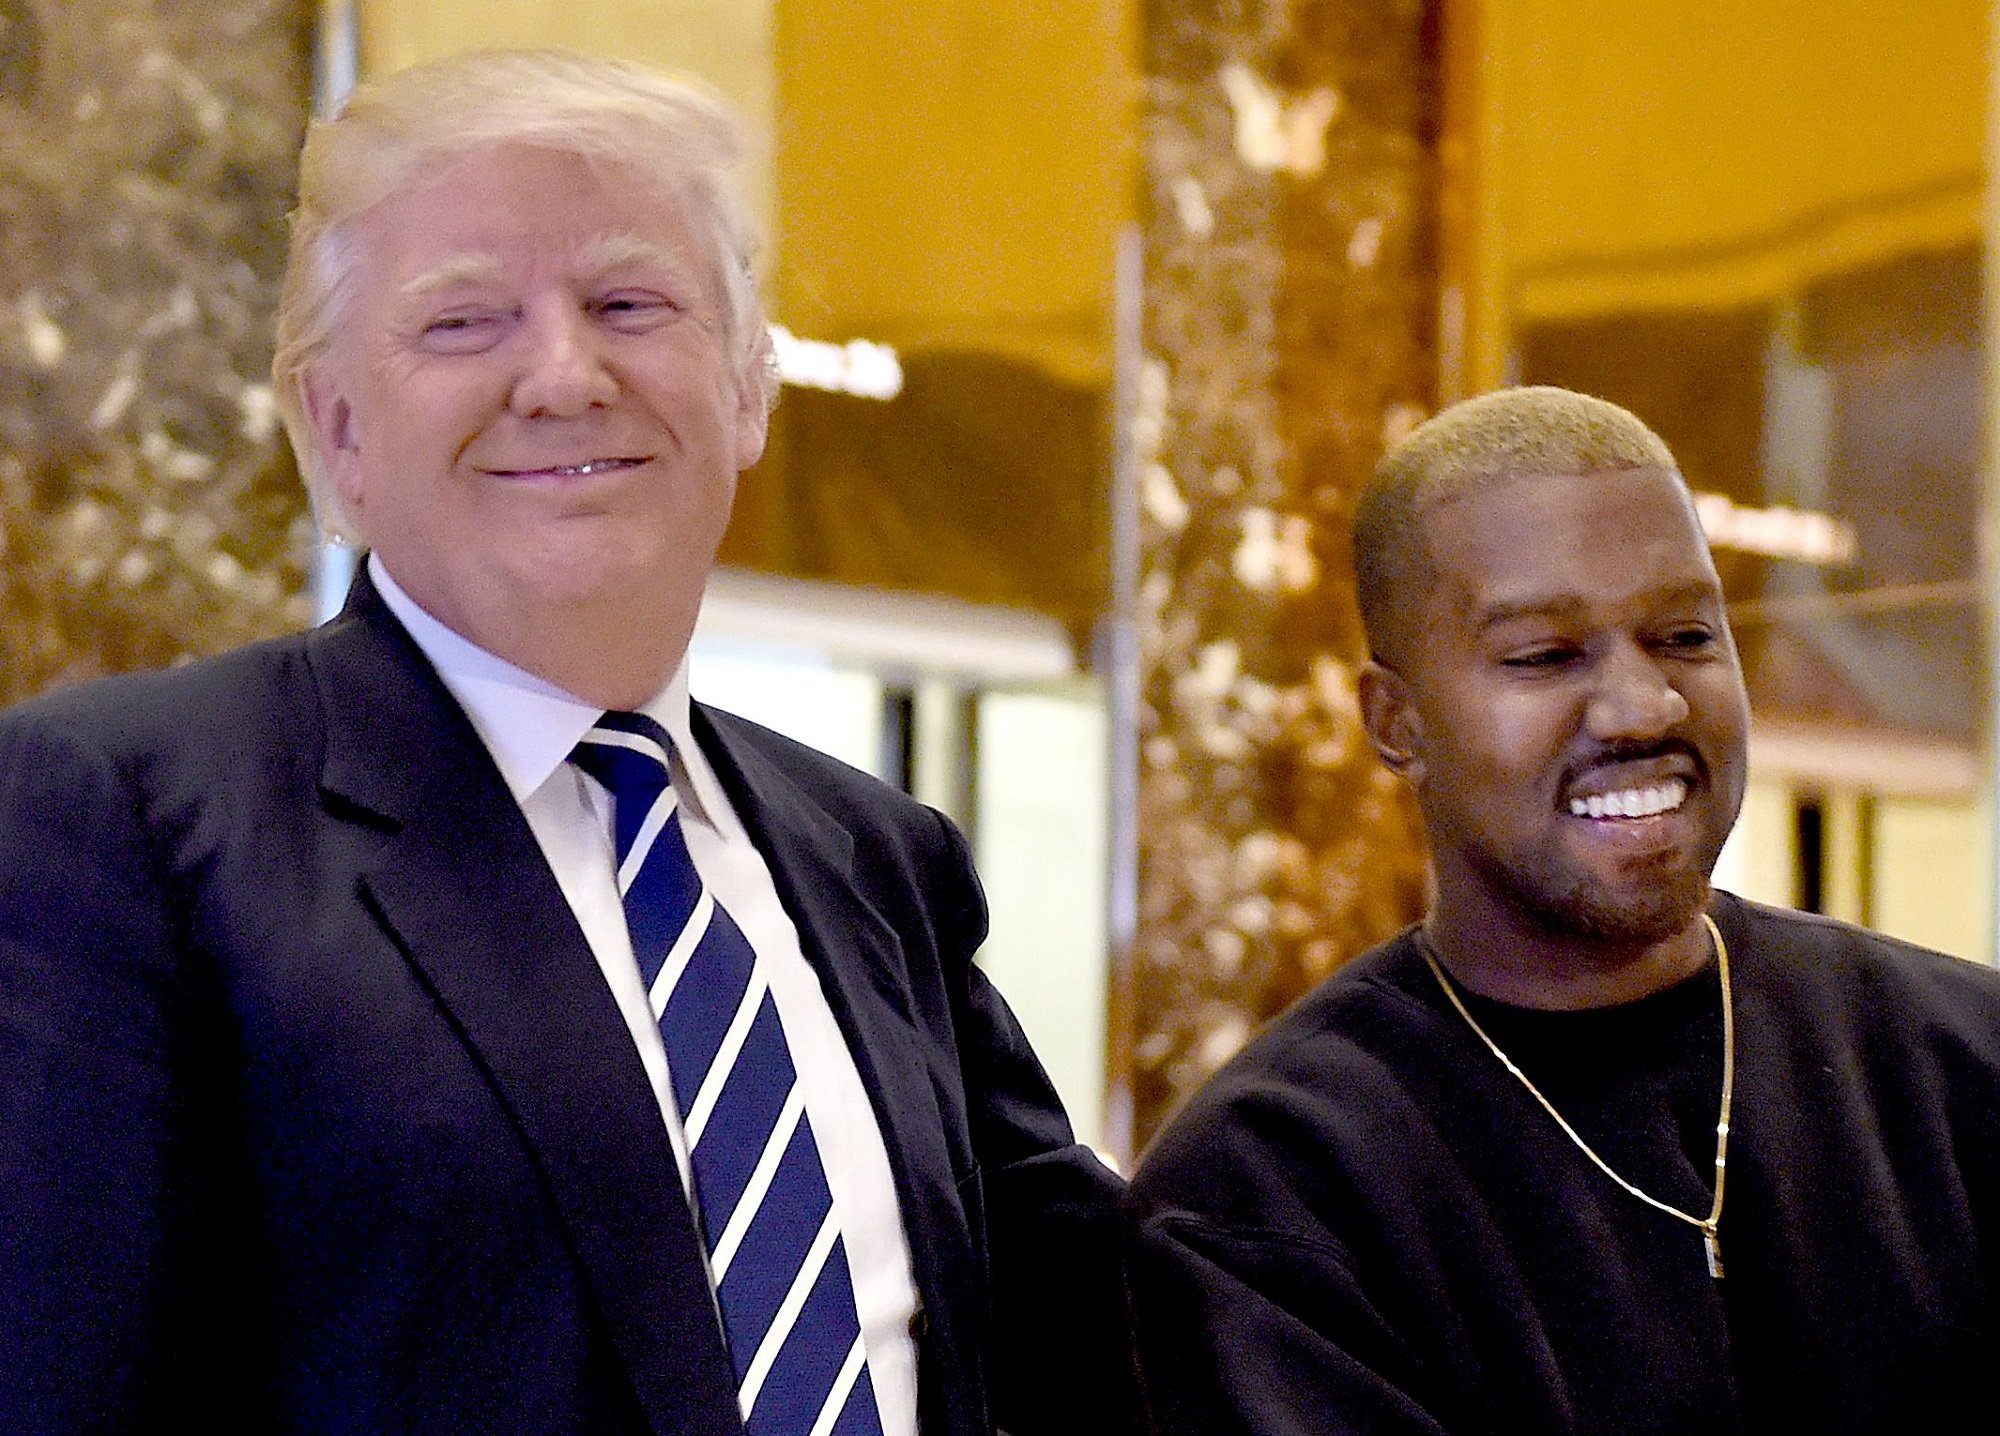 Kanye West and Donald Trump on December 13, 2016 in New York